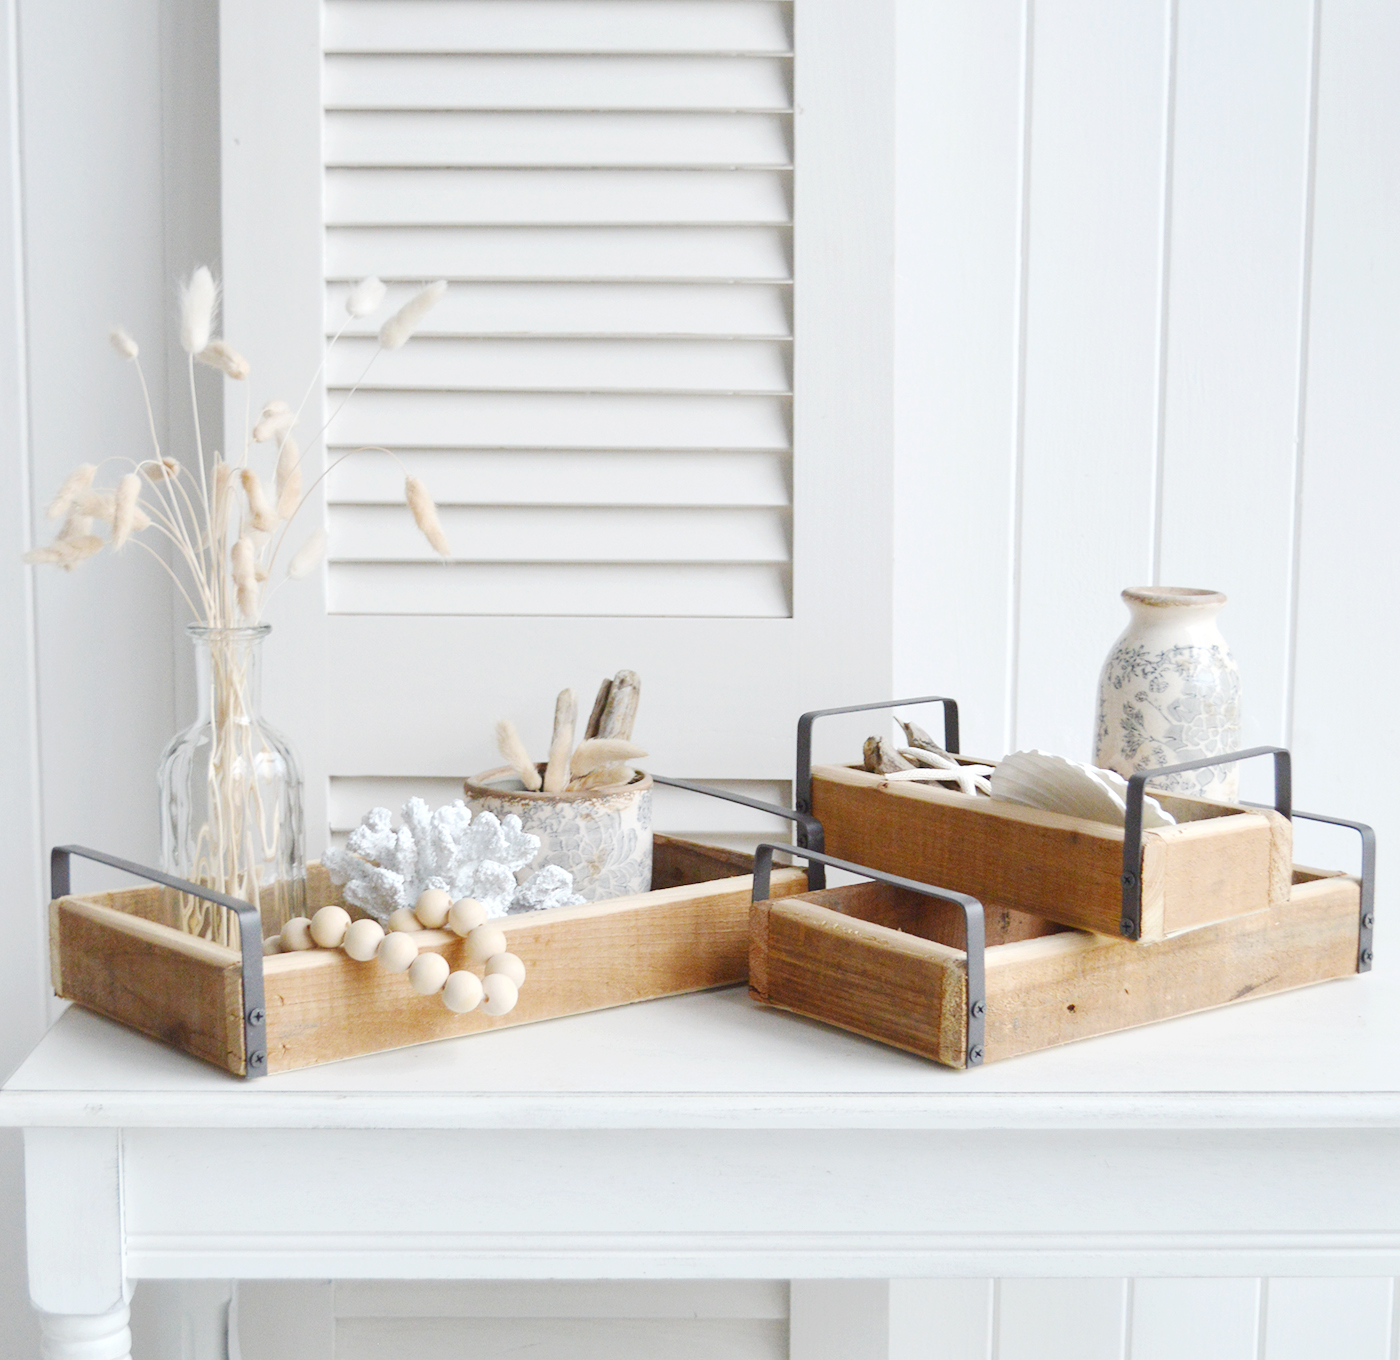 The White Lighthouse. White Furniture and accessories for the home. Set of 3 Pawtucket Wooden Trays for display in New England, Country and coastal home interior decor